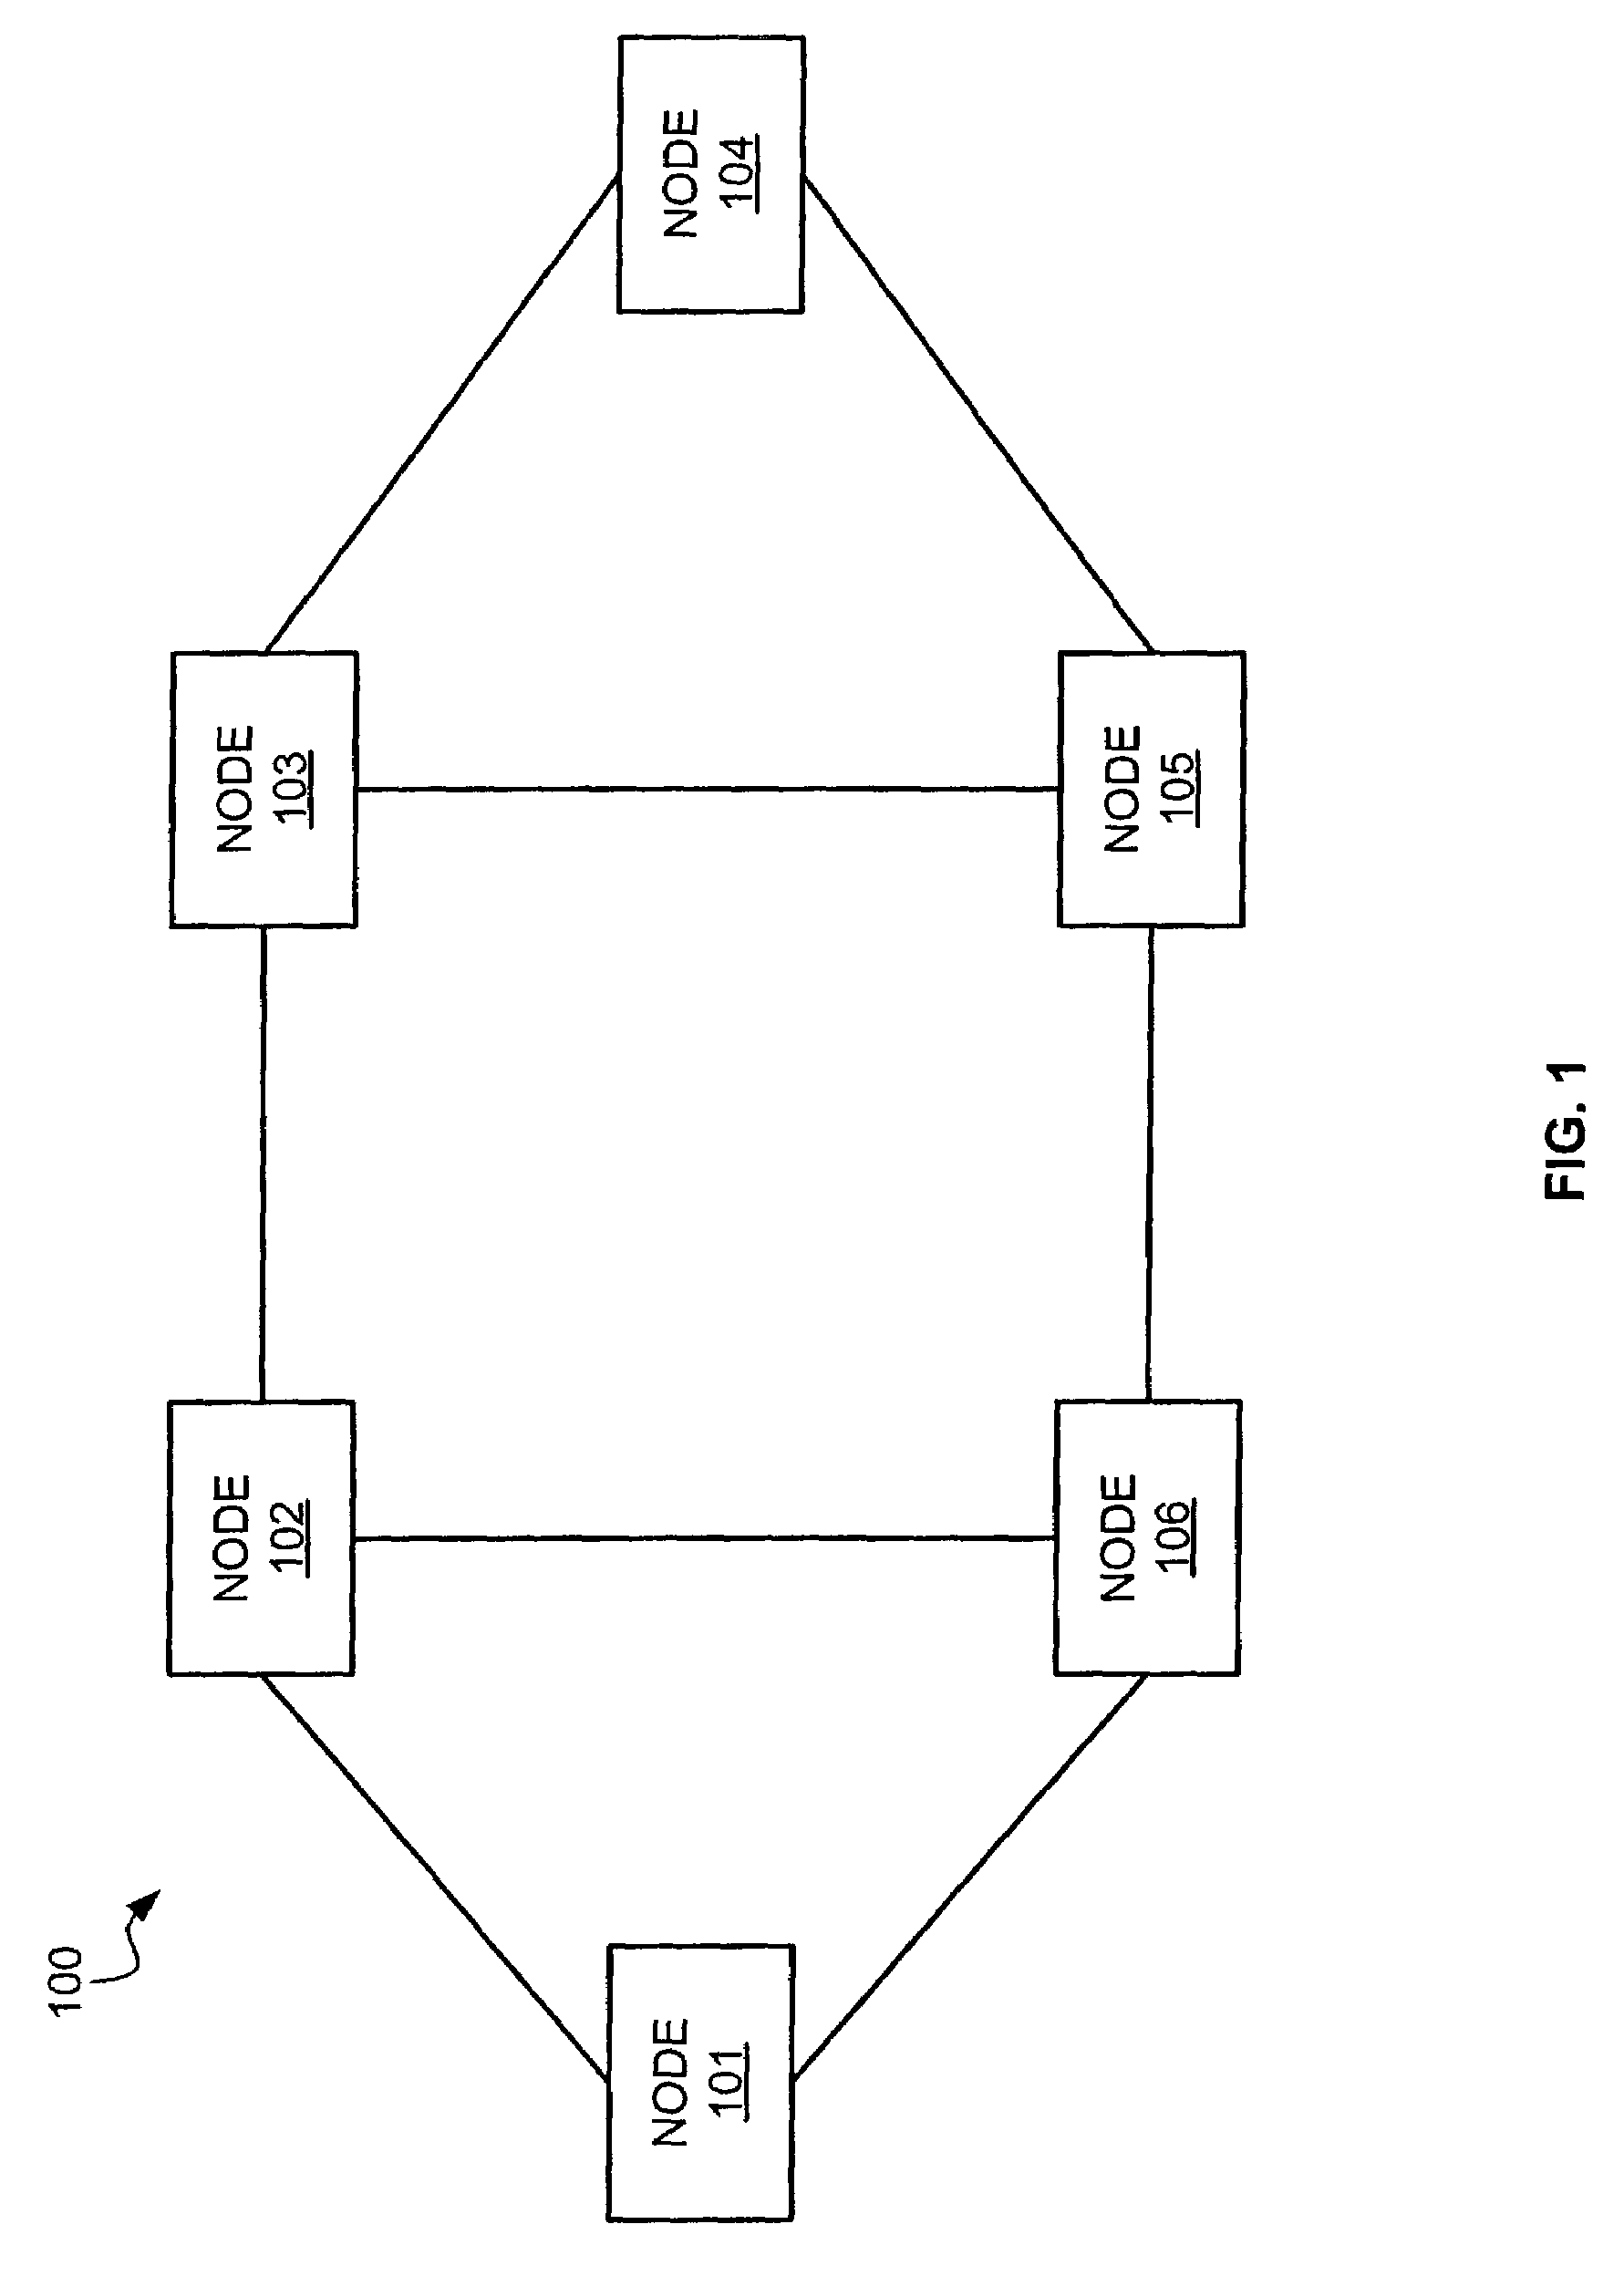 Communication network design with wavelength converters